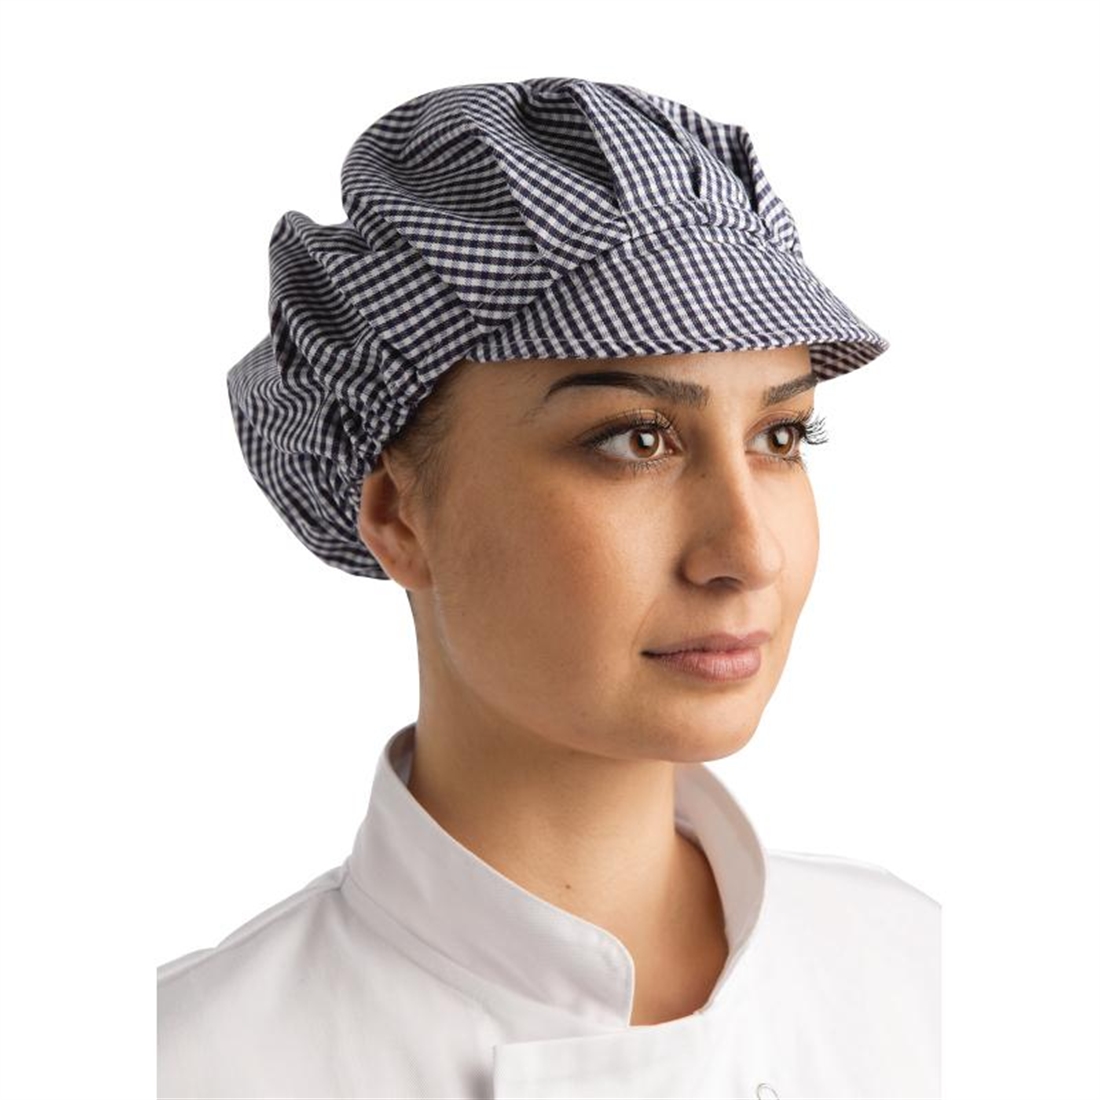 Whites Peaked Hat Blue and White Check